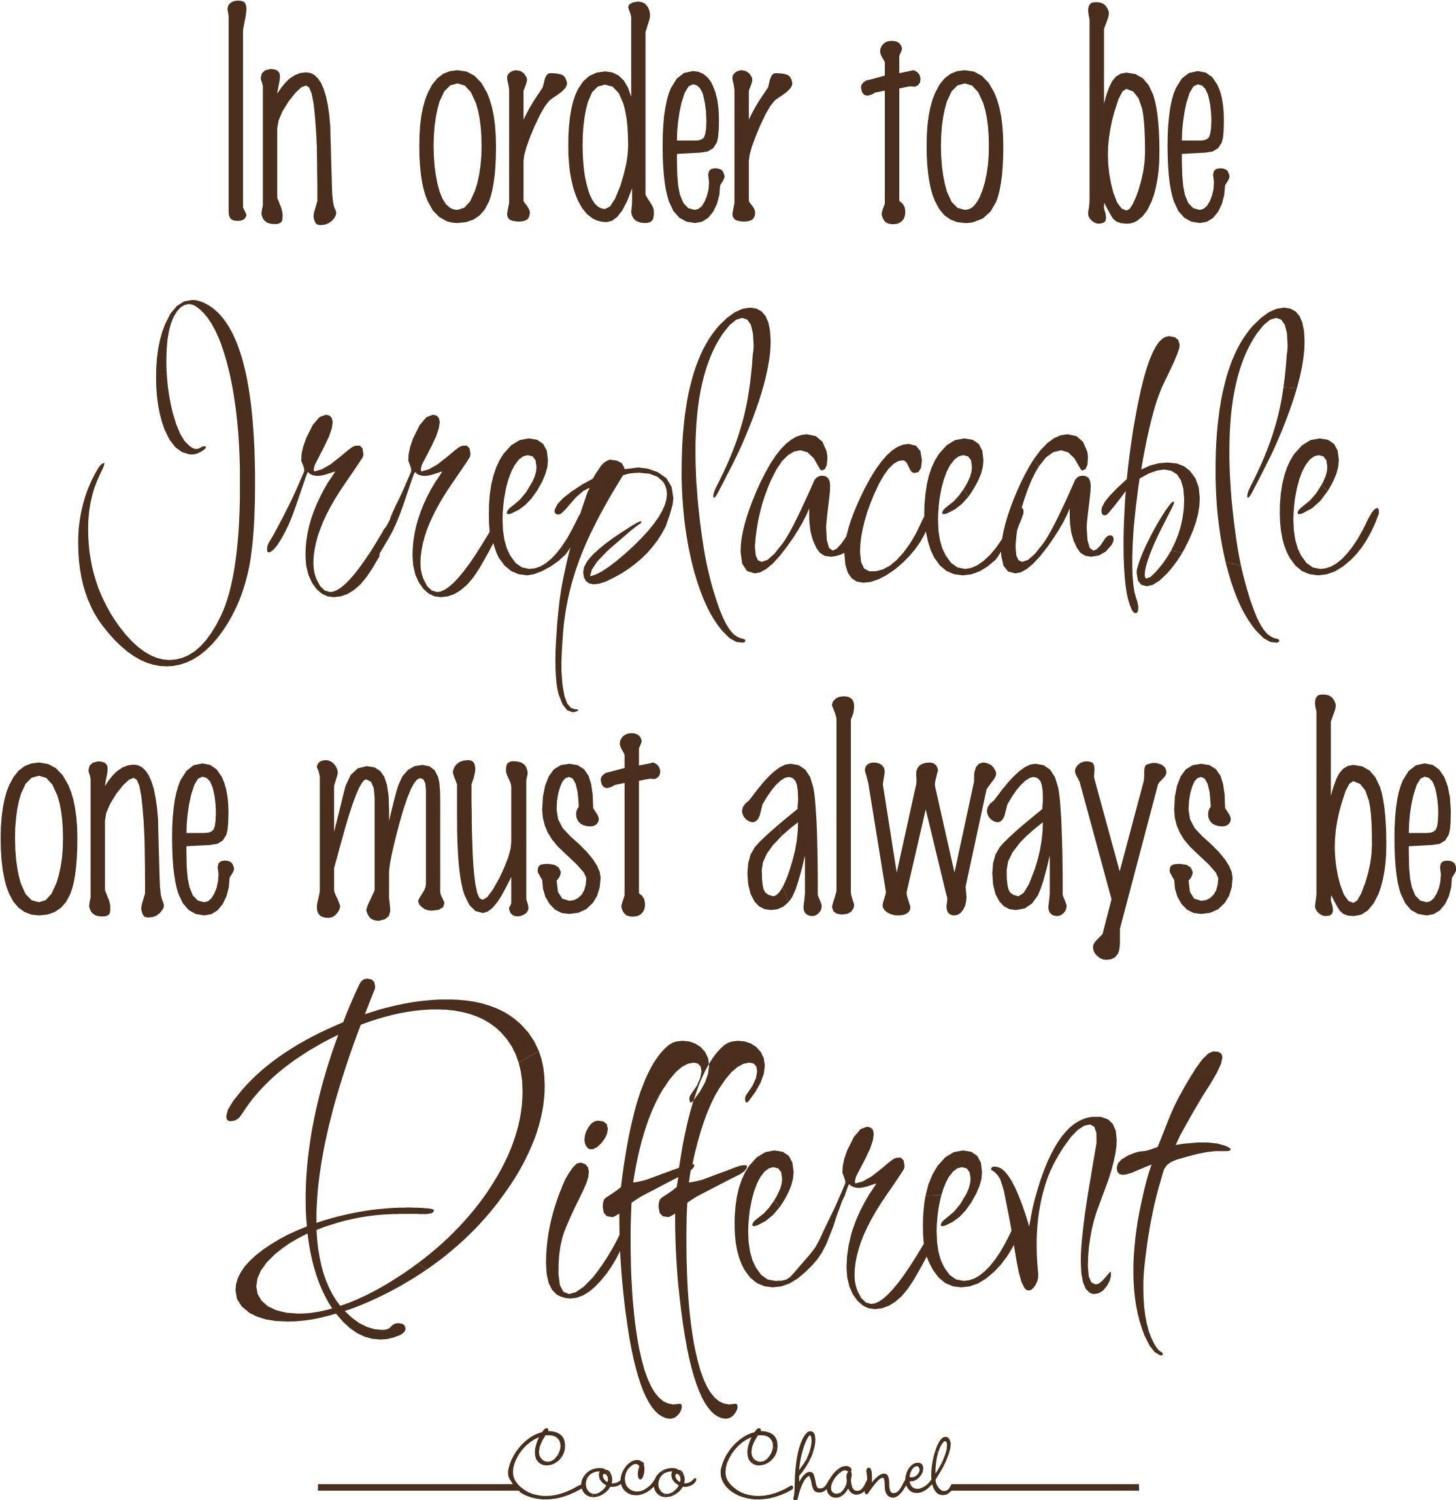 Coco Chanel - Featuring a Quote from a French Fashion Designer: In Order to  Be Irreplaceable One Must Always Be Different (24 x 36)